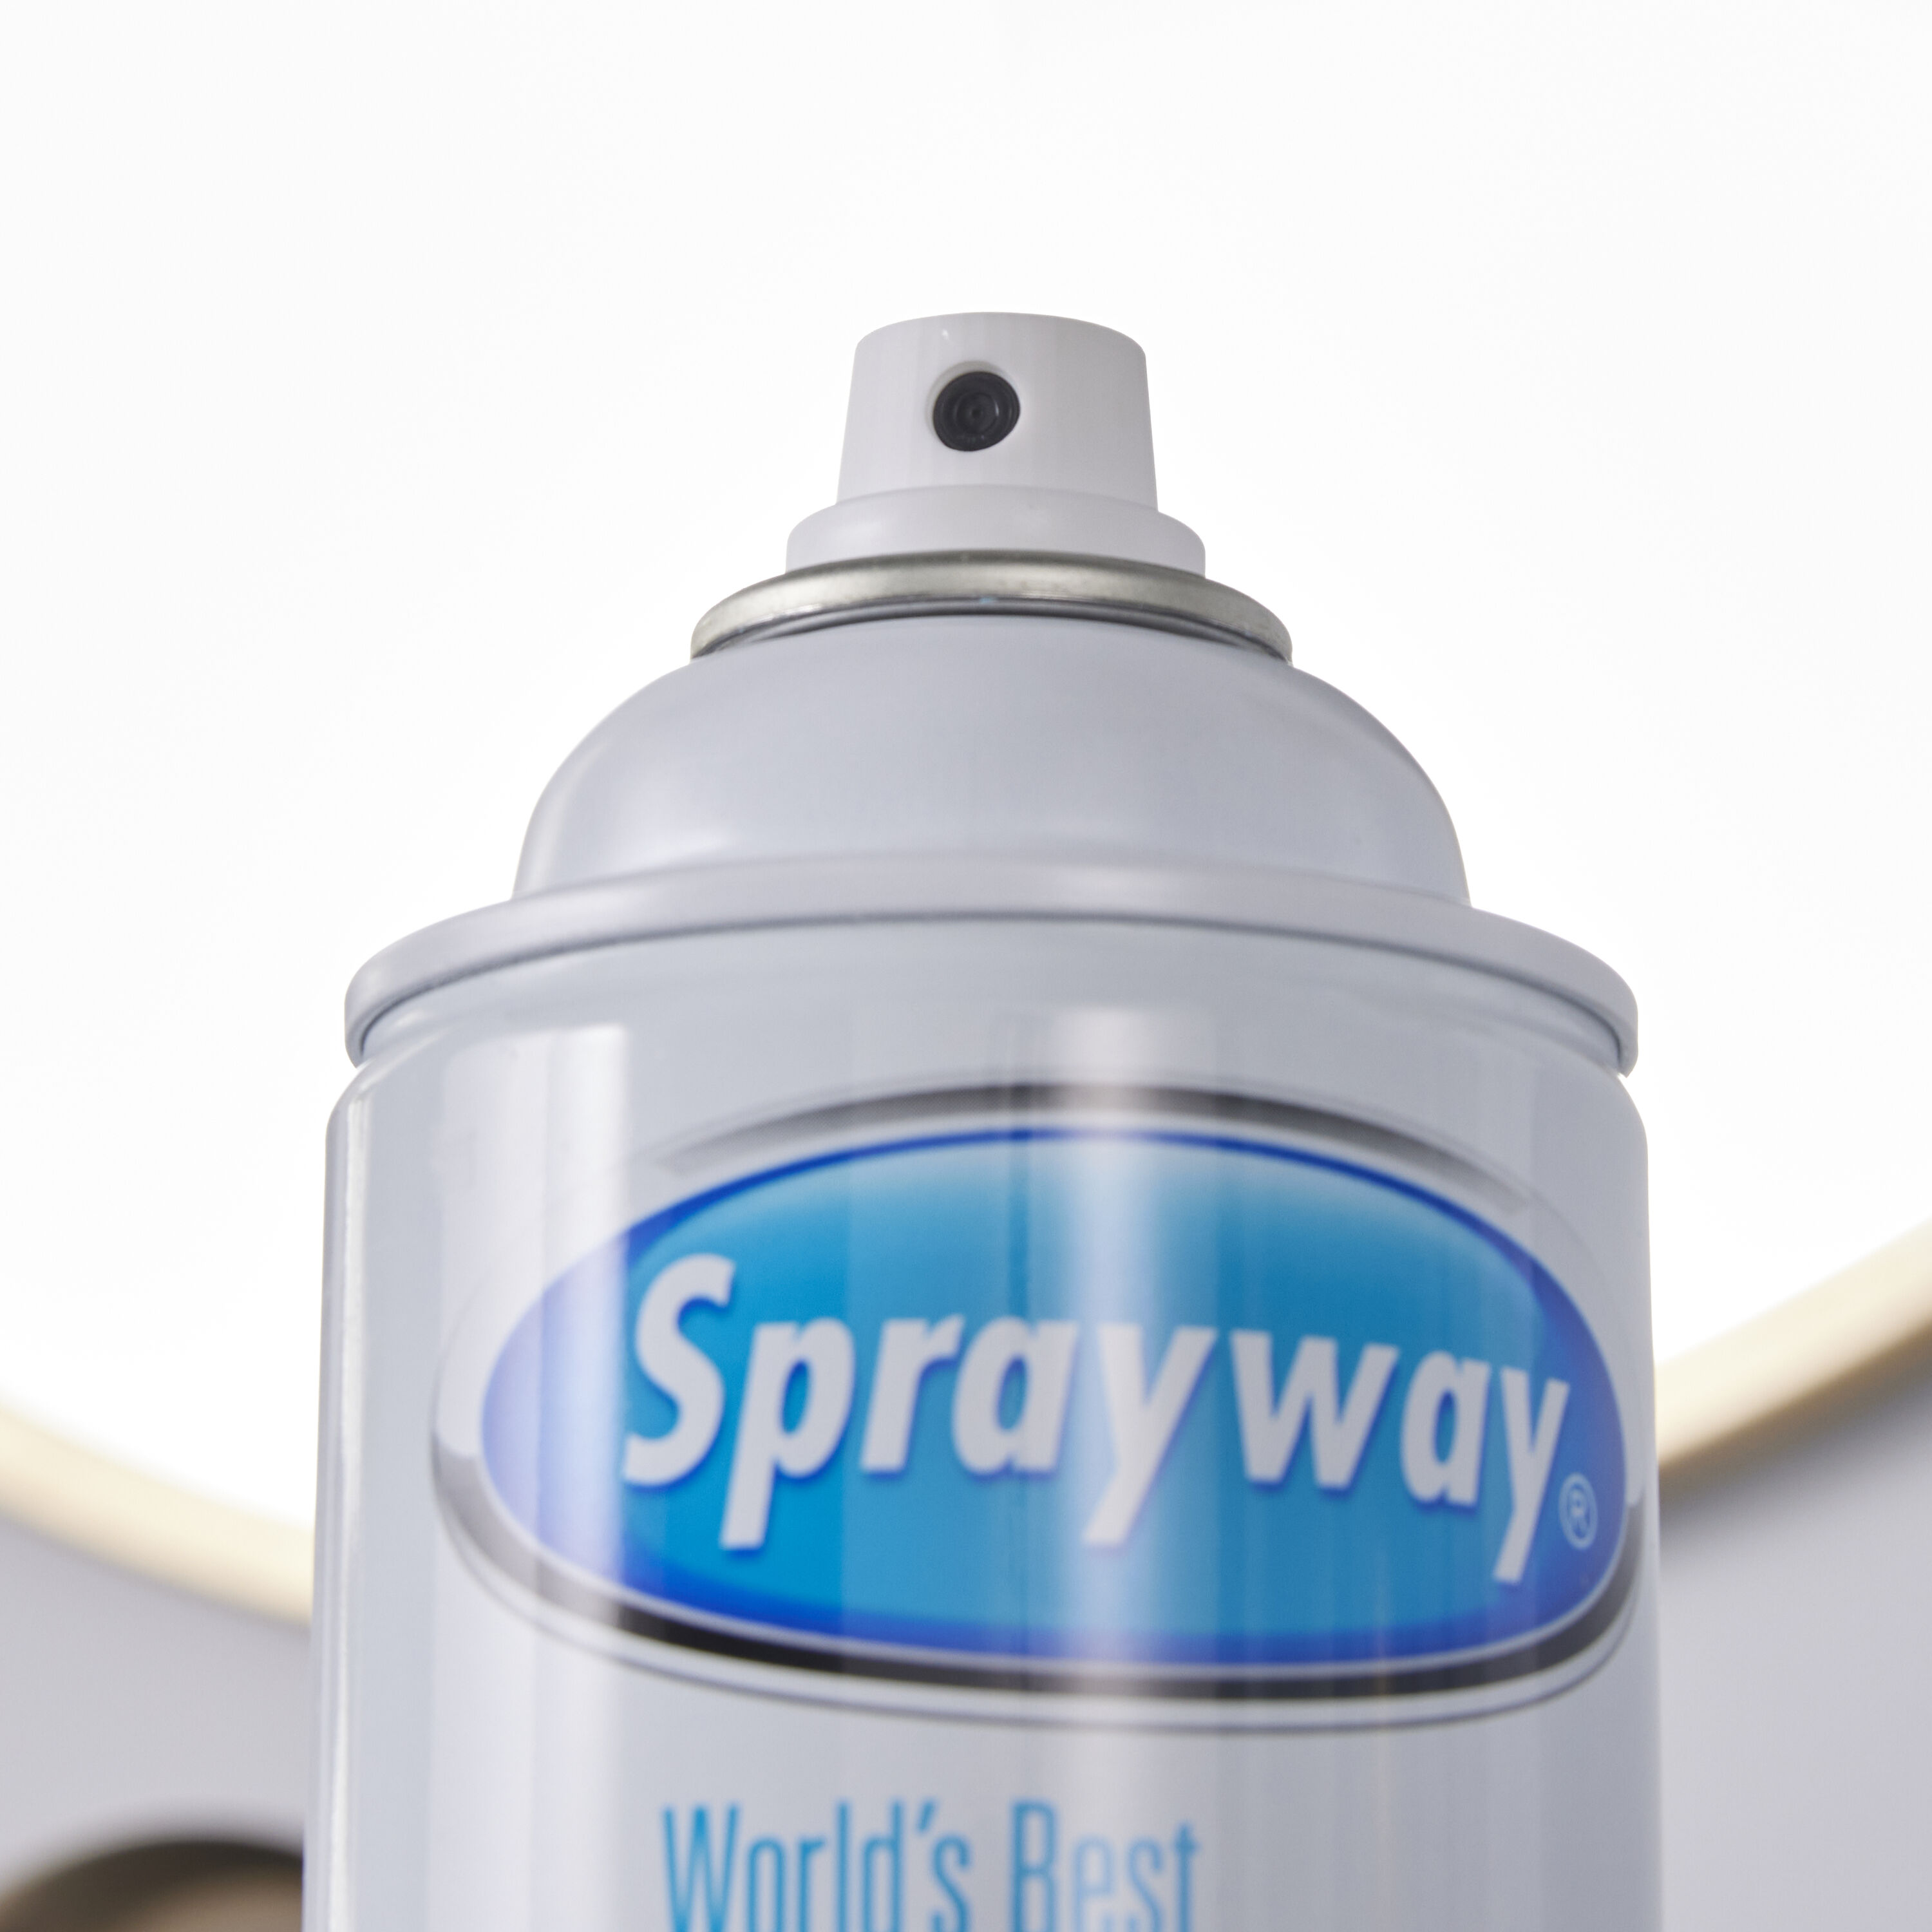 Sprayway glass cleaner is loved. I bought it at #homedepot for